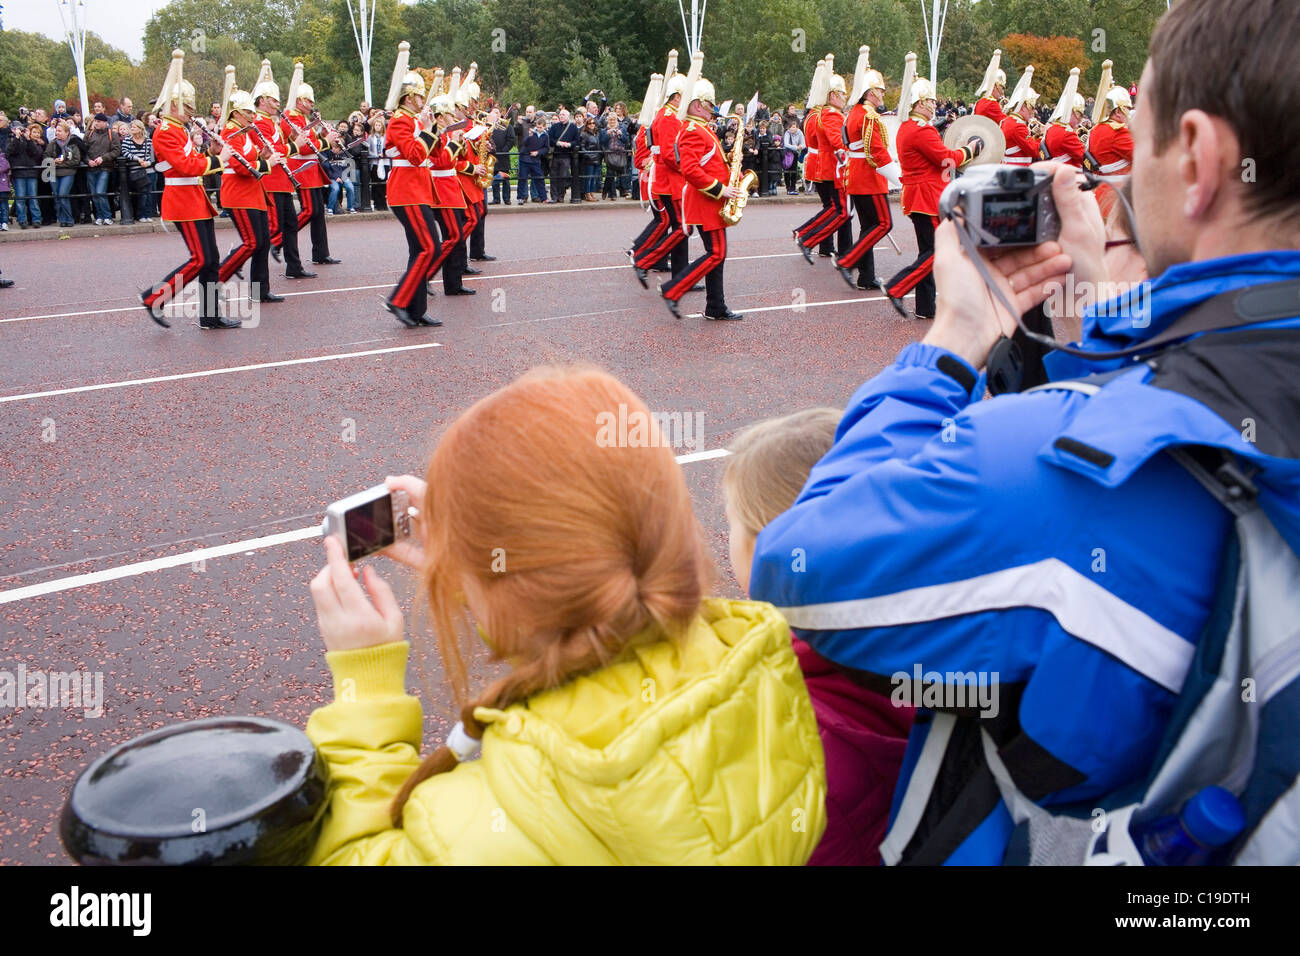 The changing of the guard at Buckingham Palace in central London. Stock Photo